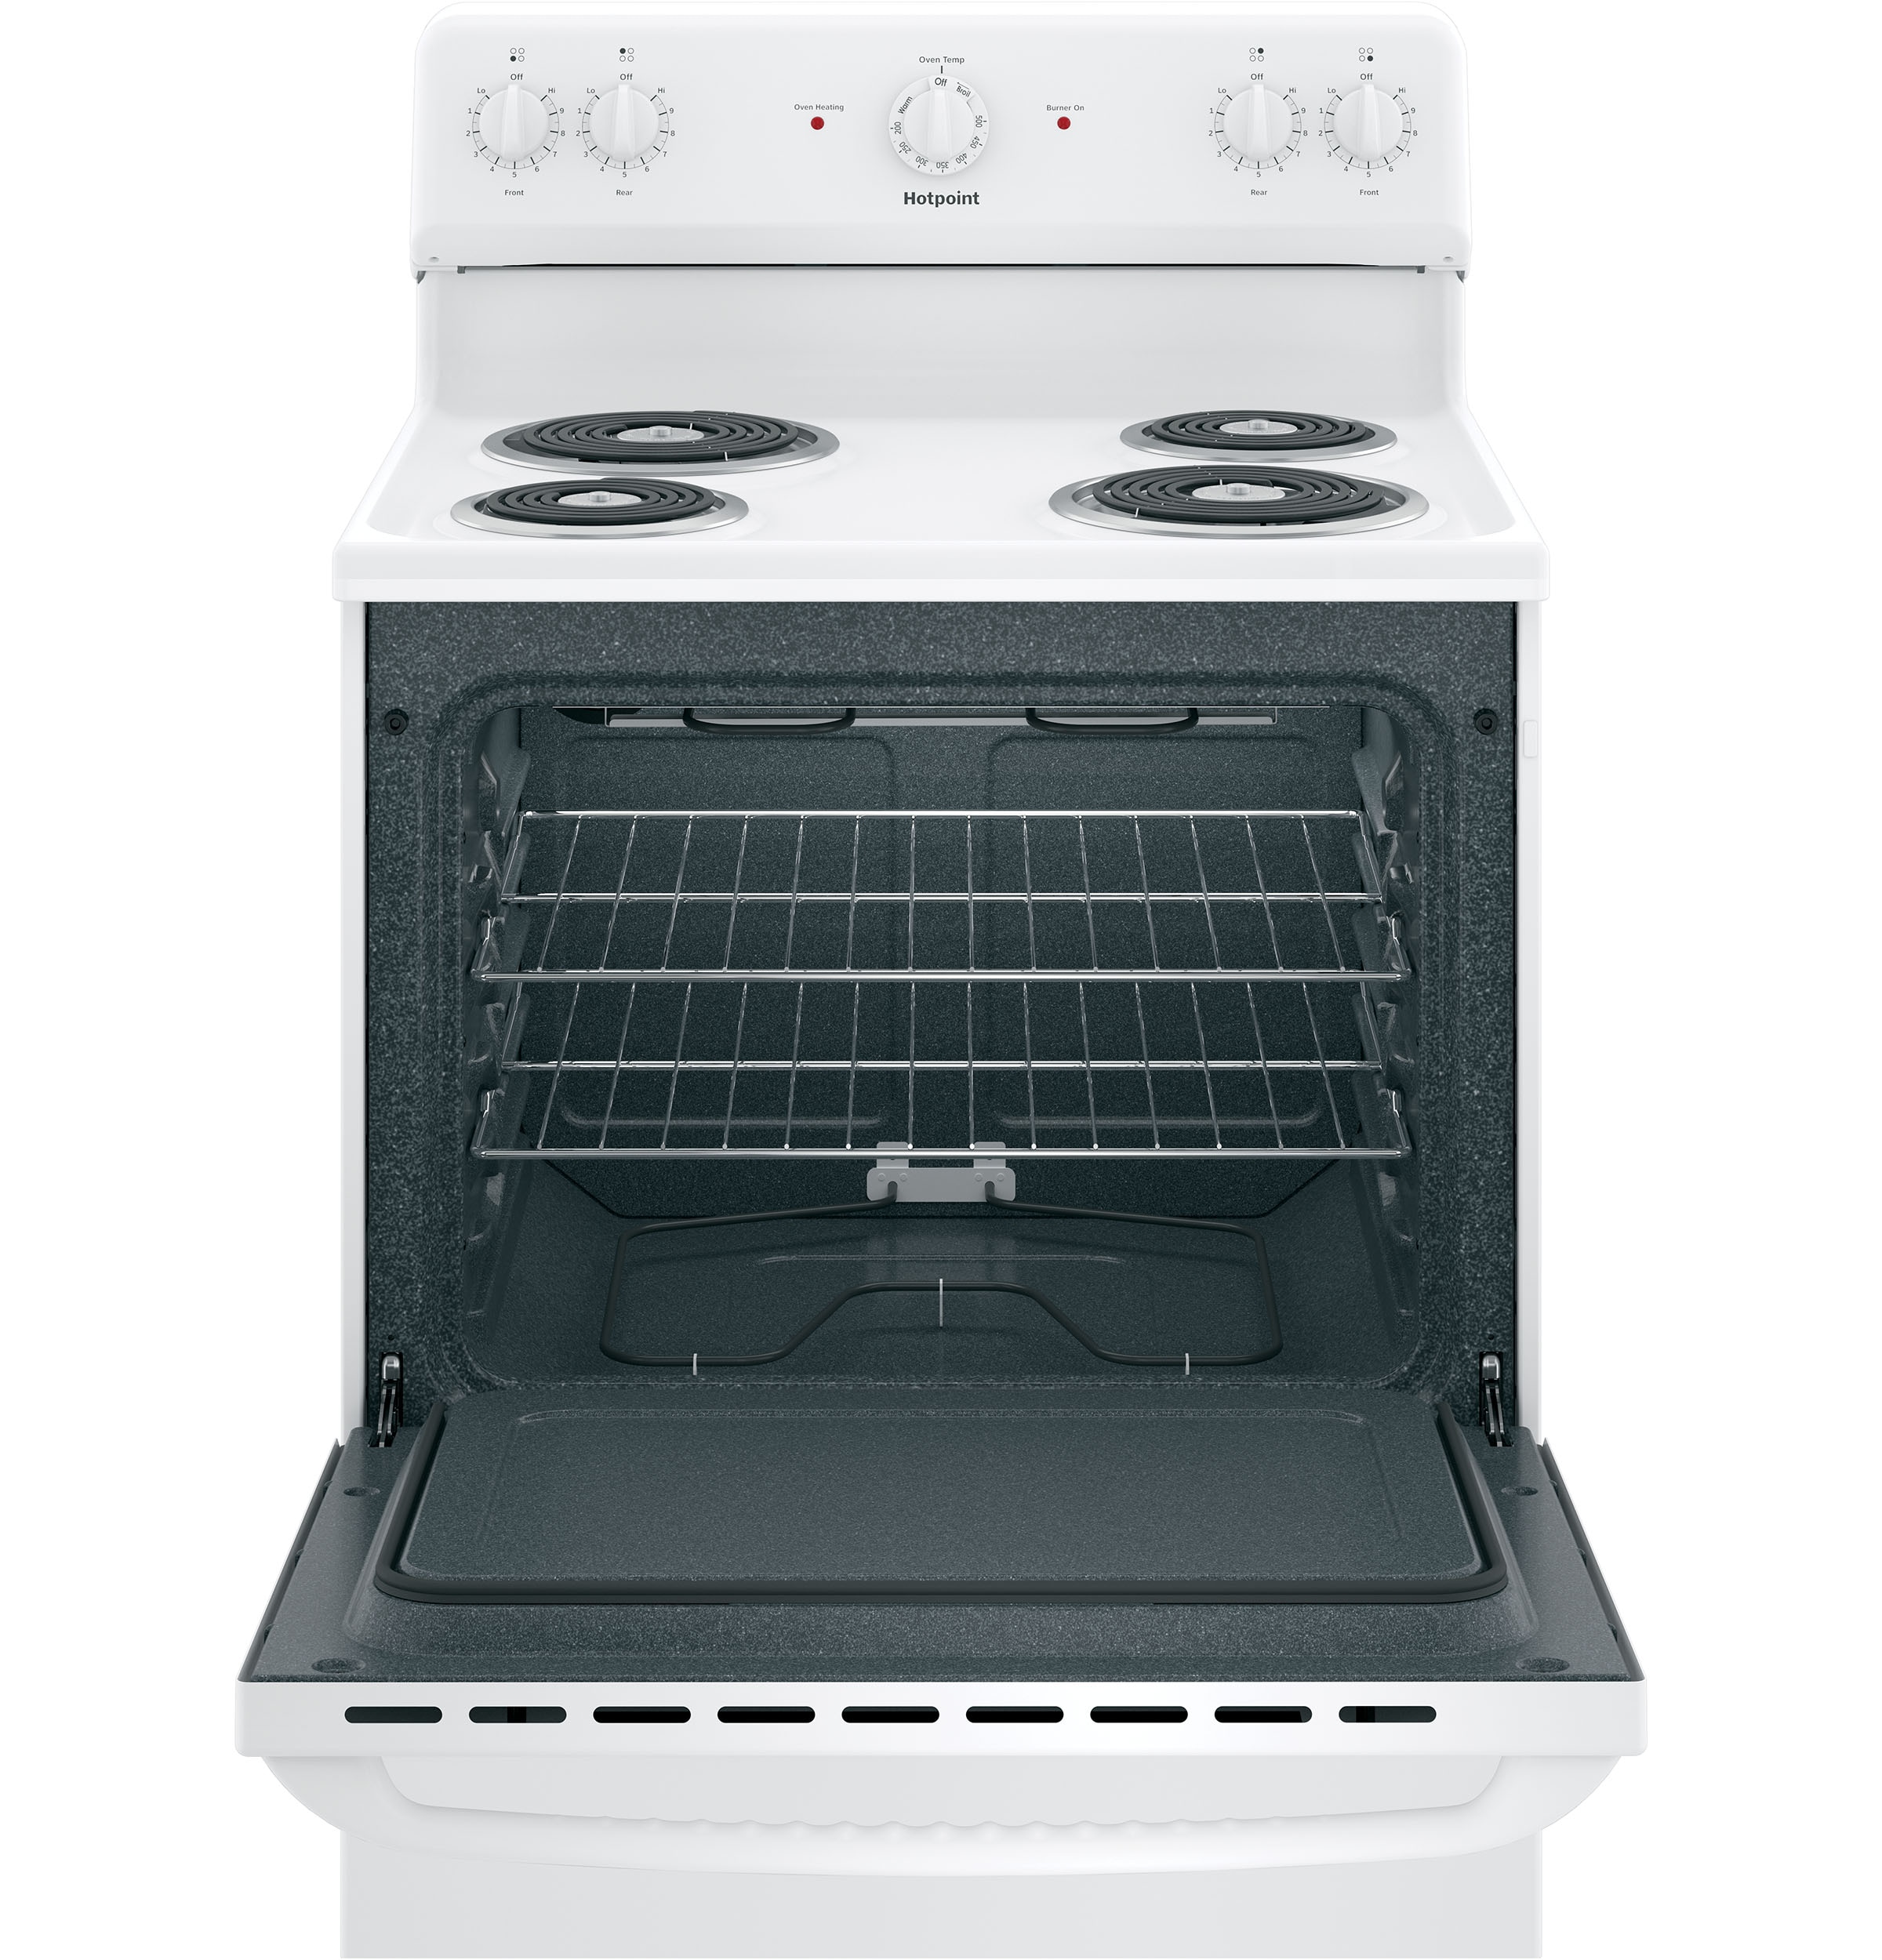 Hotpoint 20 in. 2.3 cu. ft. Freestanding Electric Range in White RAS200DMWW  - The Home Depot